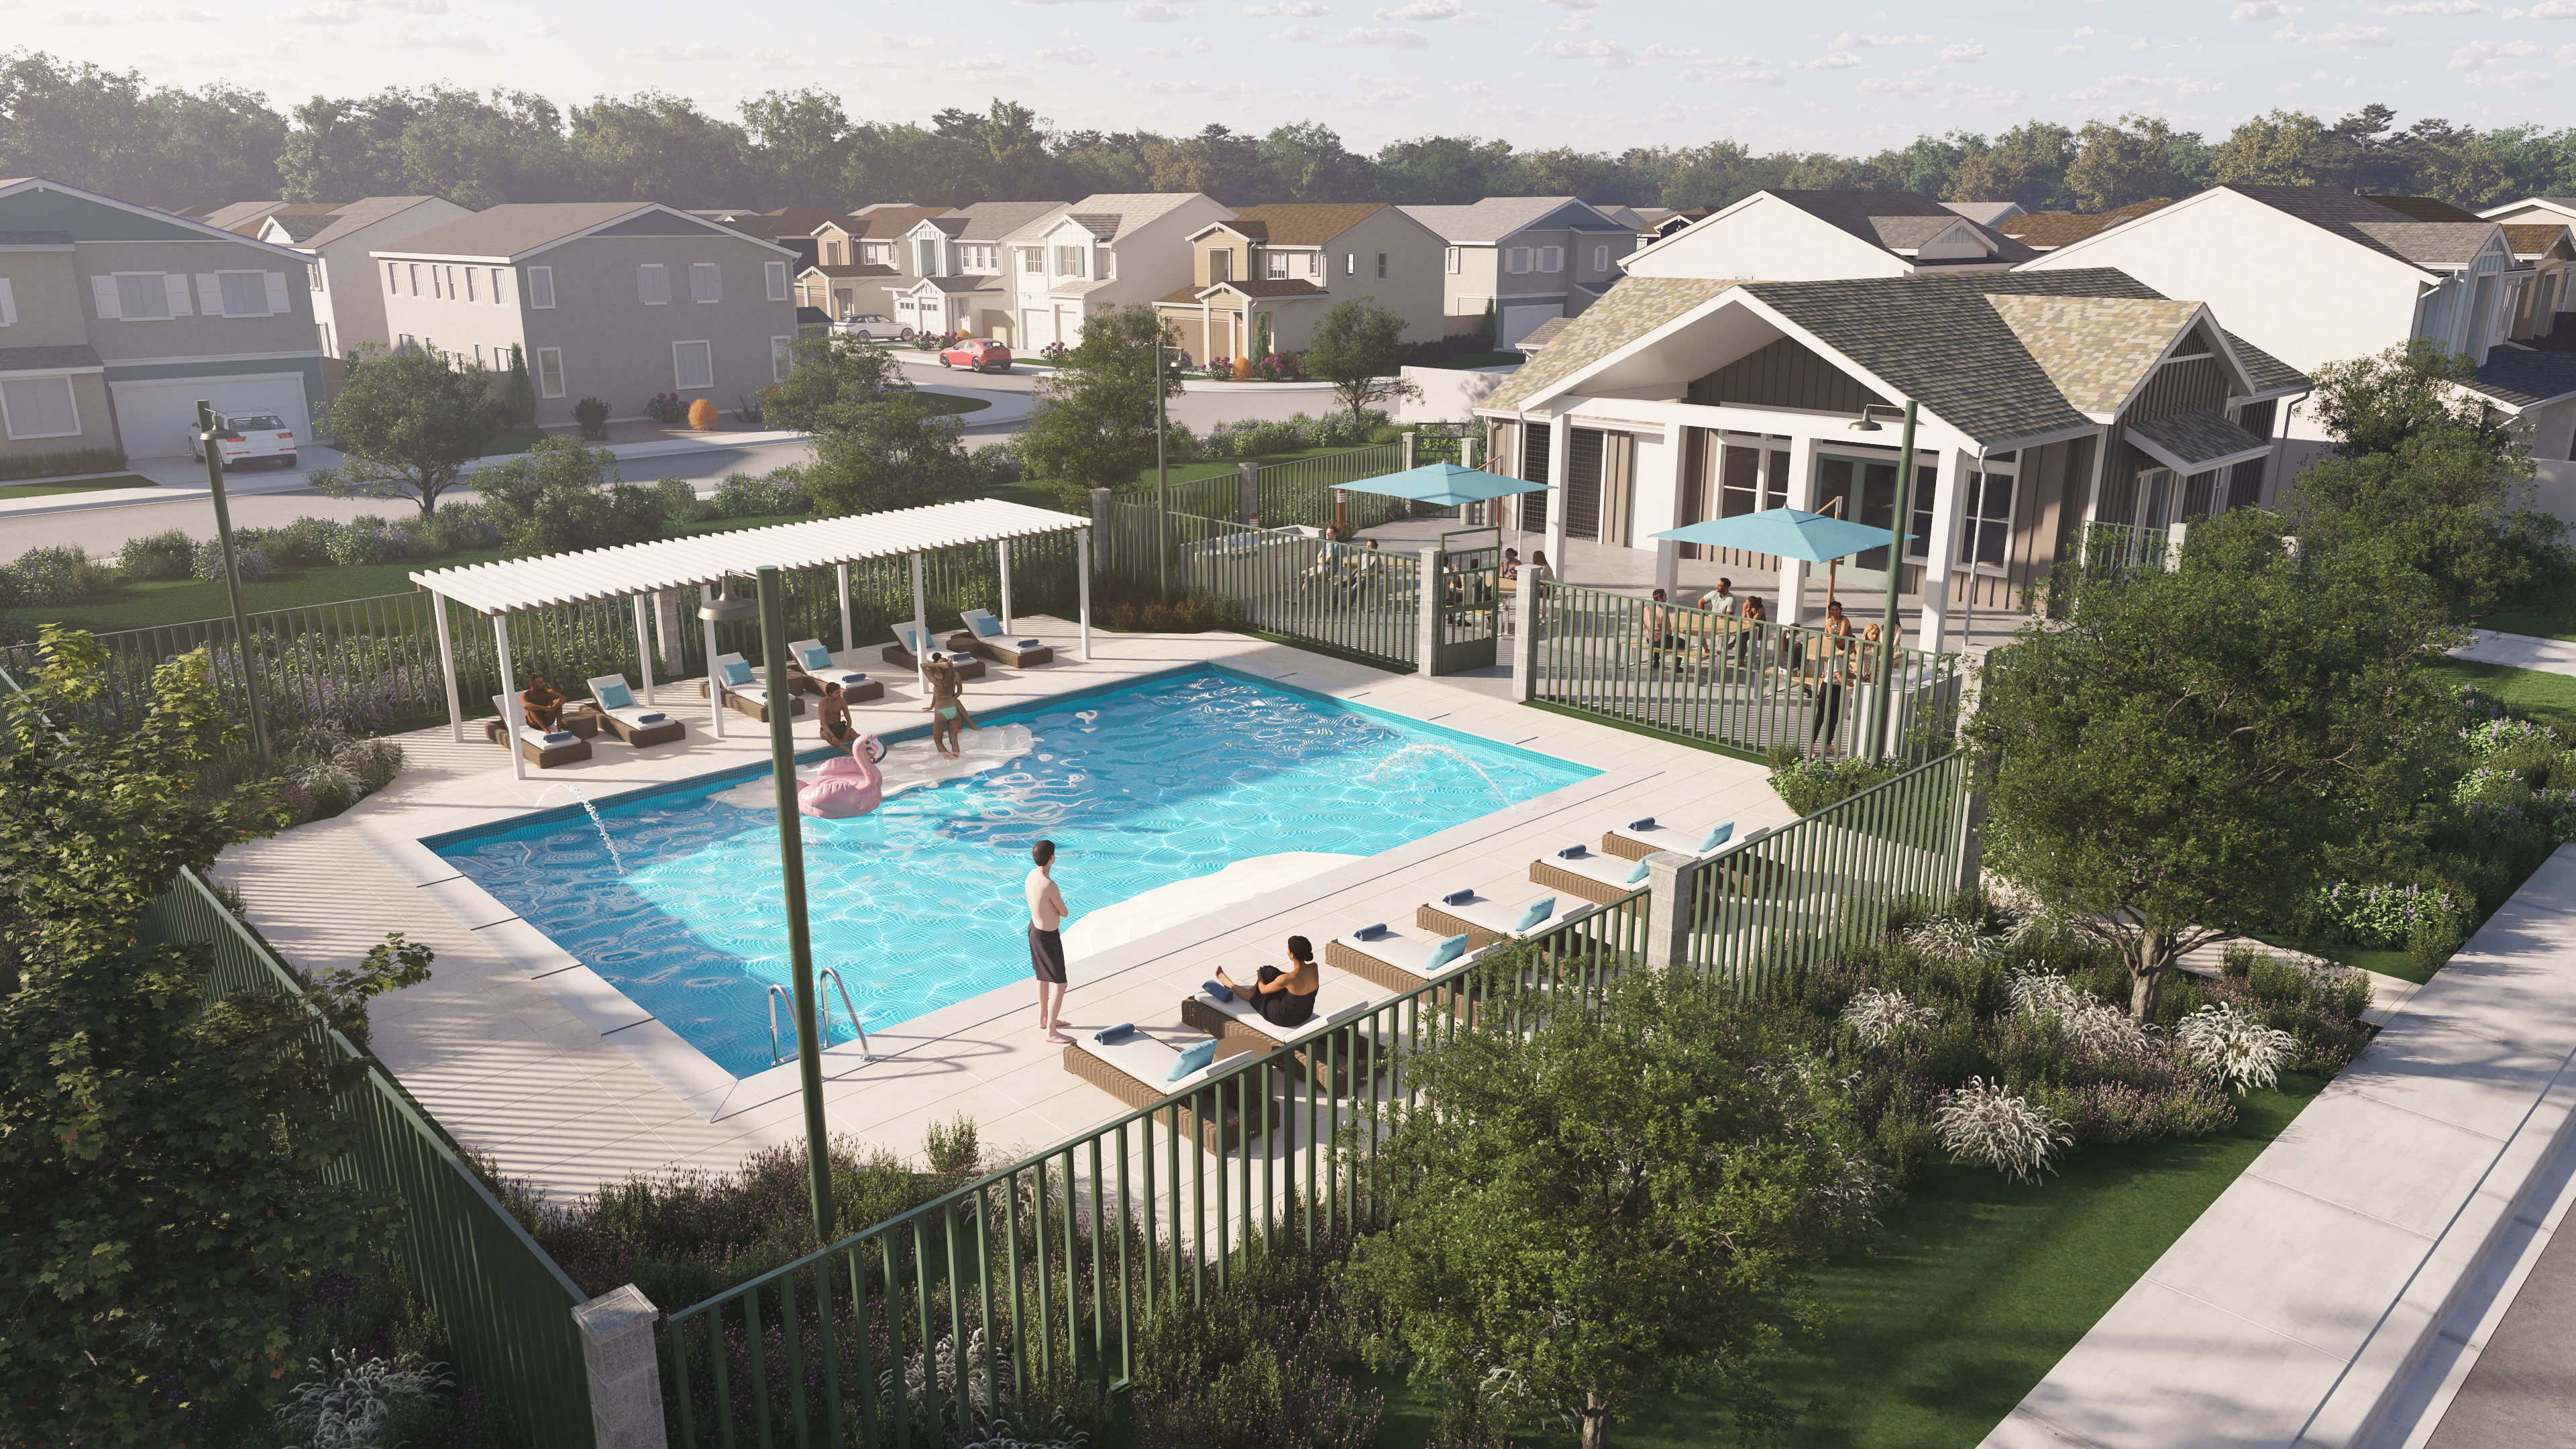 Rendering of community pool with shaded seating area and people sunbathing.